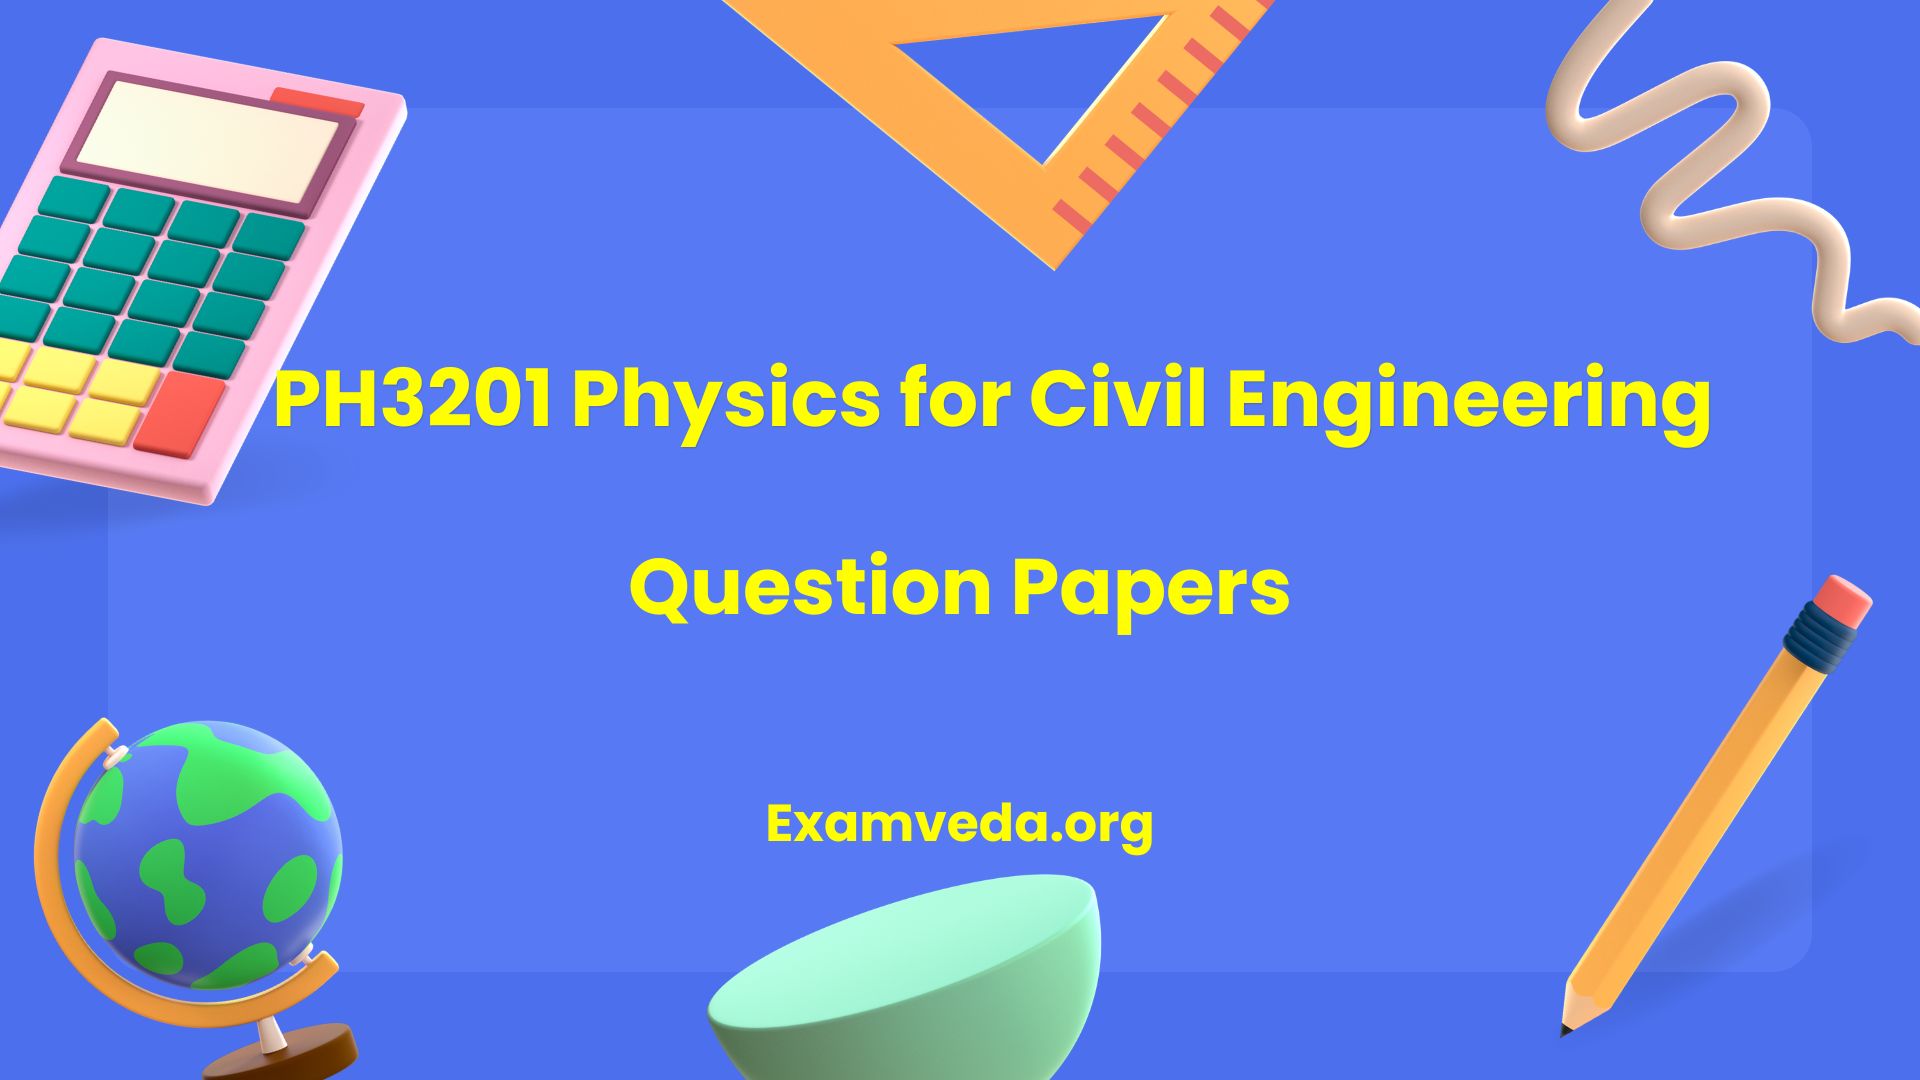 PH3201 Physics for Civil Engineering Question Papers